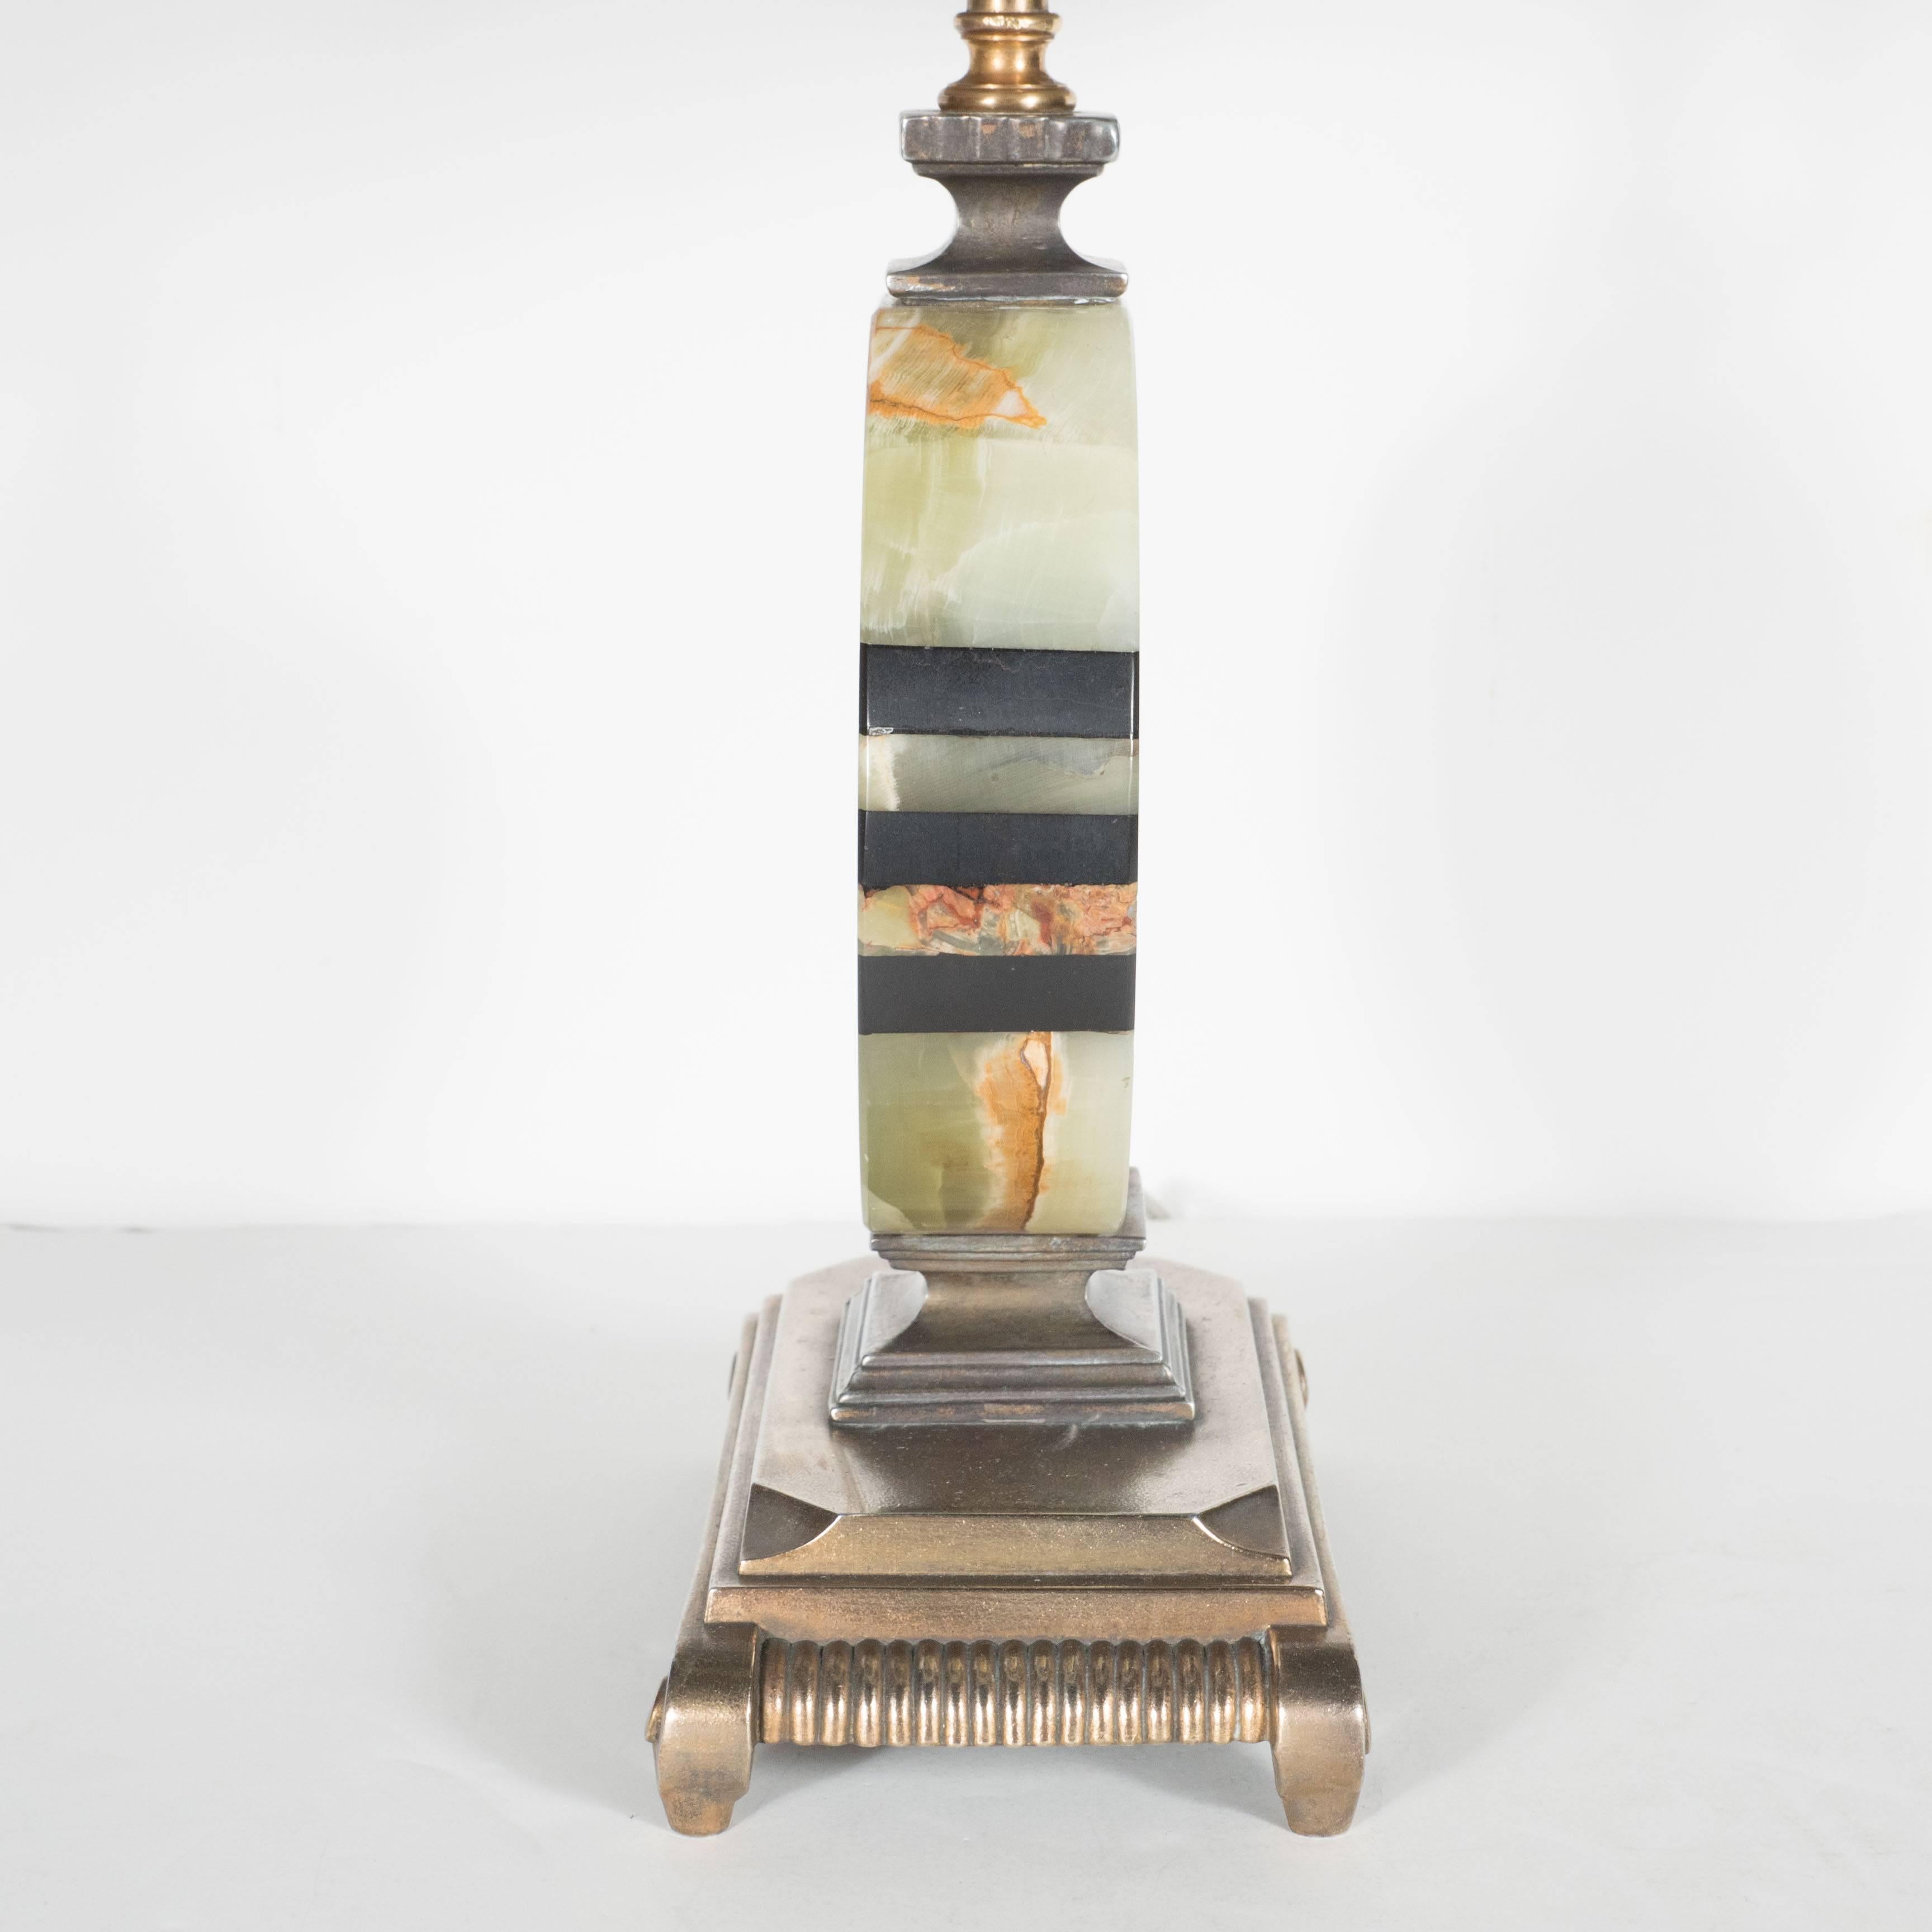 Gorgeous Art Deco Skyscraper table lamp in exotic green onyx and gilded bronze
superbly designed in the Art Deco style with Skyscraper base in gilded bronze upon which stands a flask shape body in onyx in various shades of green attractively inlaid